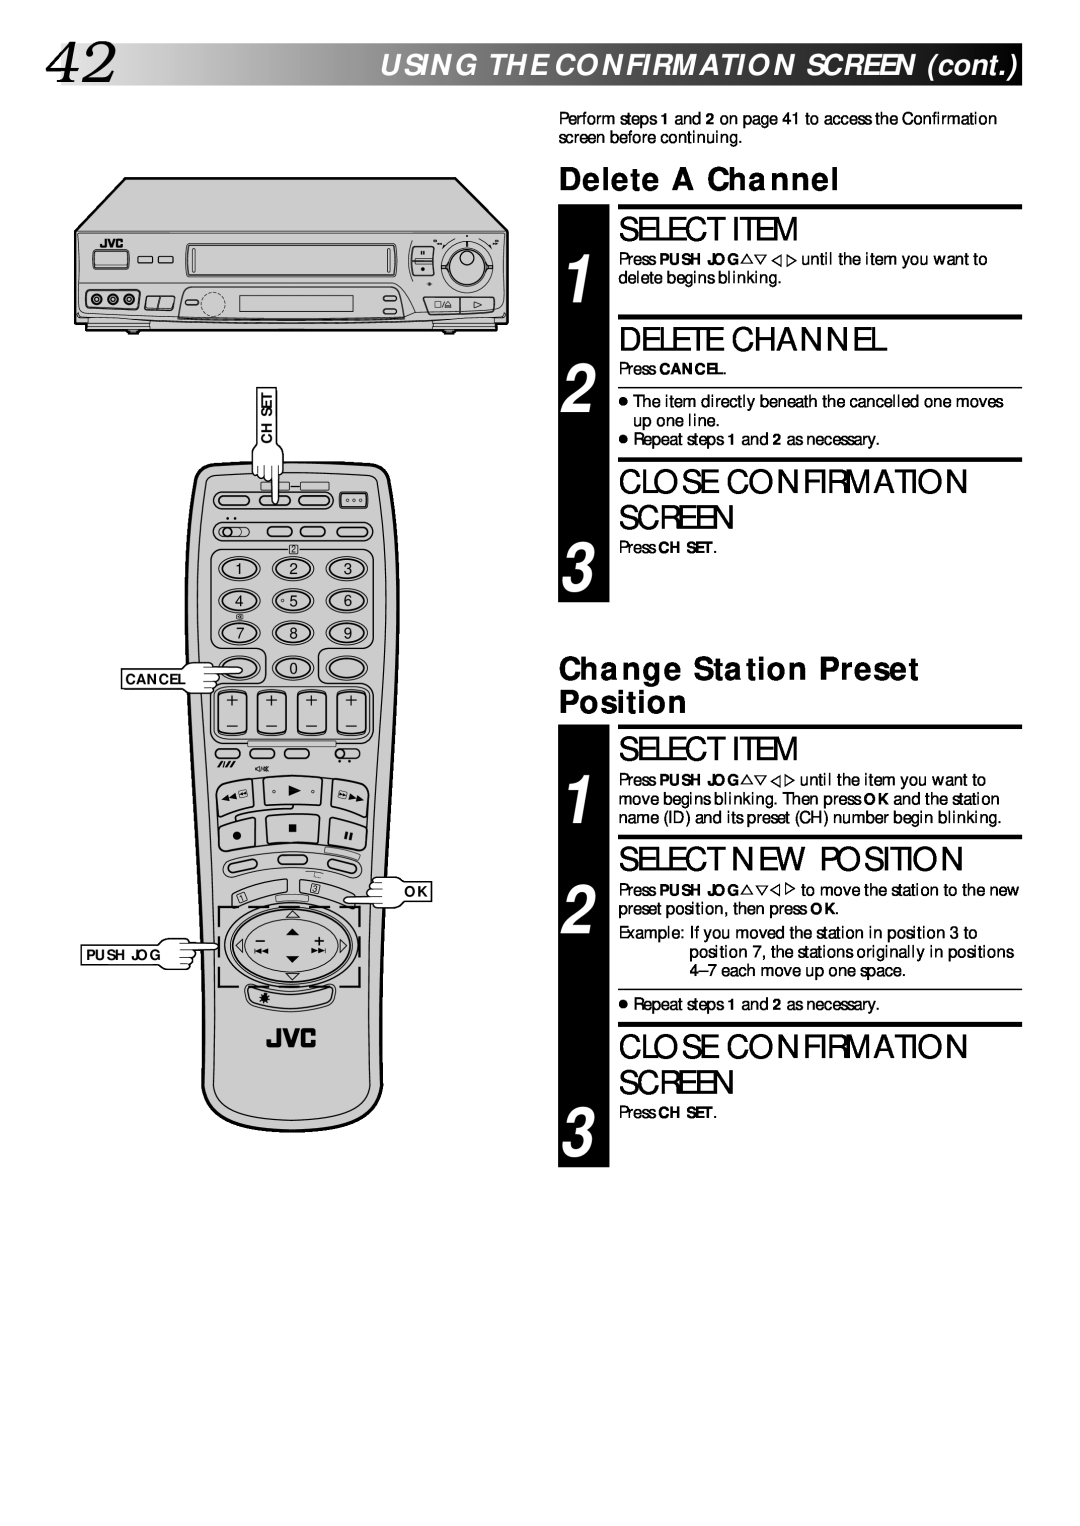 JVC PU30425 Select Item, Delete Channel, Select New Position, Delete A Channel, Change Station Preset Position, Screen 